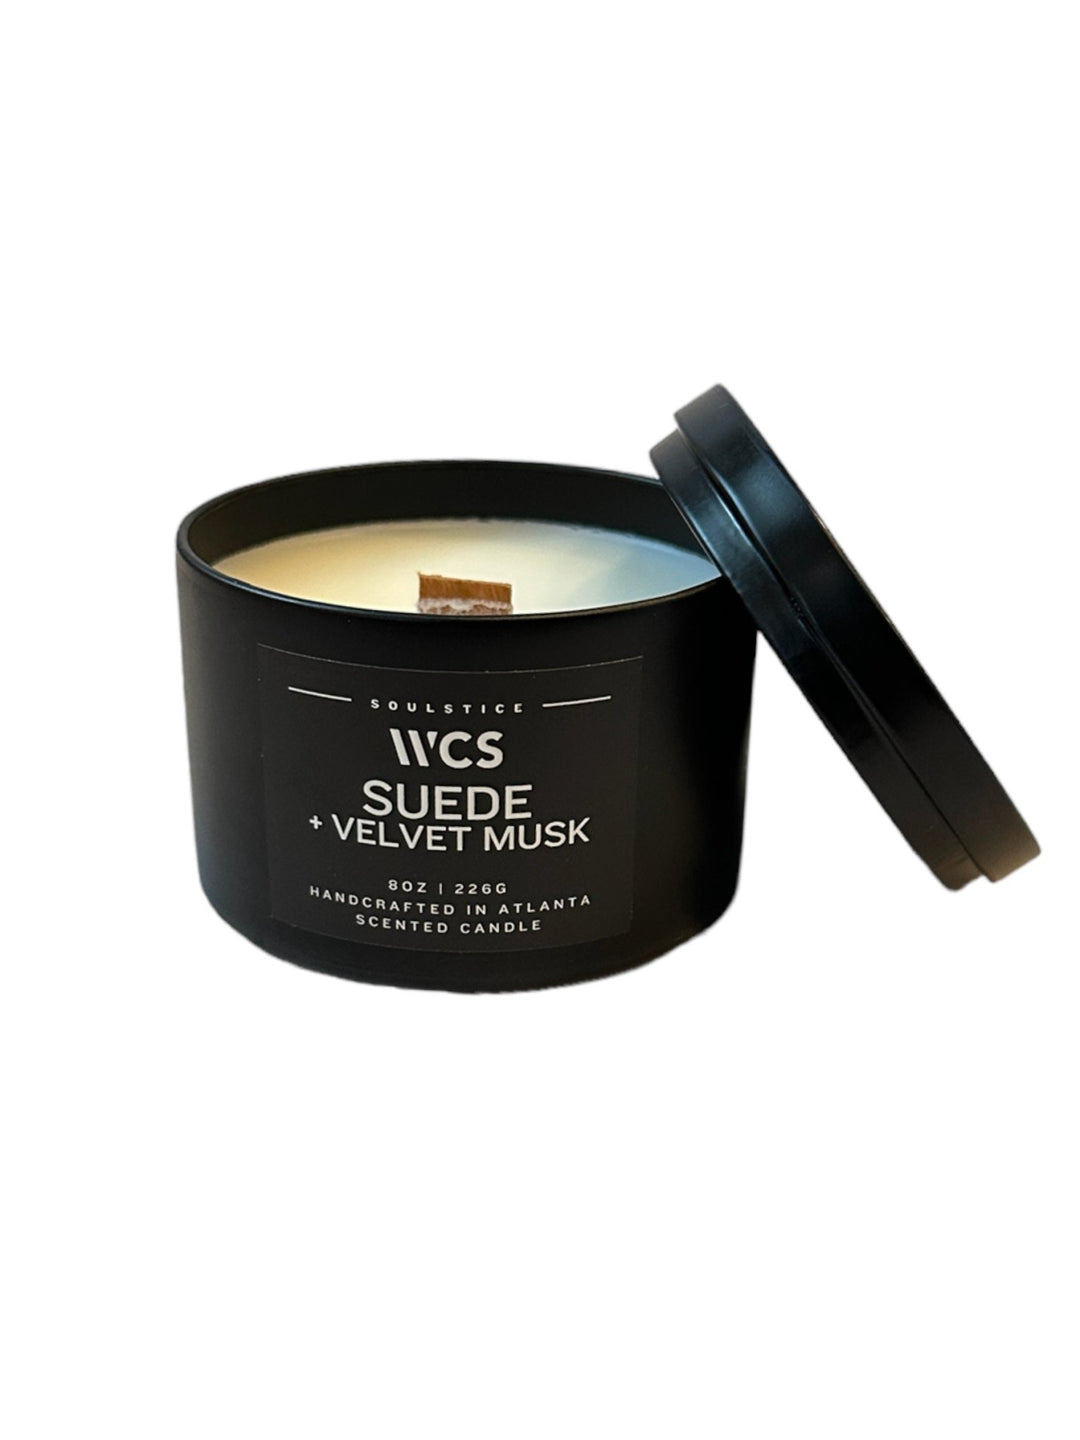 Suede + Velvet Musk Candle Tin 8 oz - The Village Retail